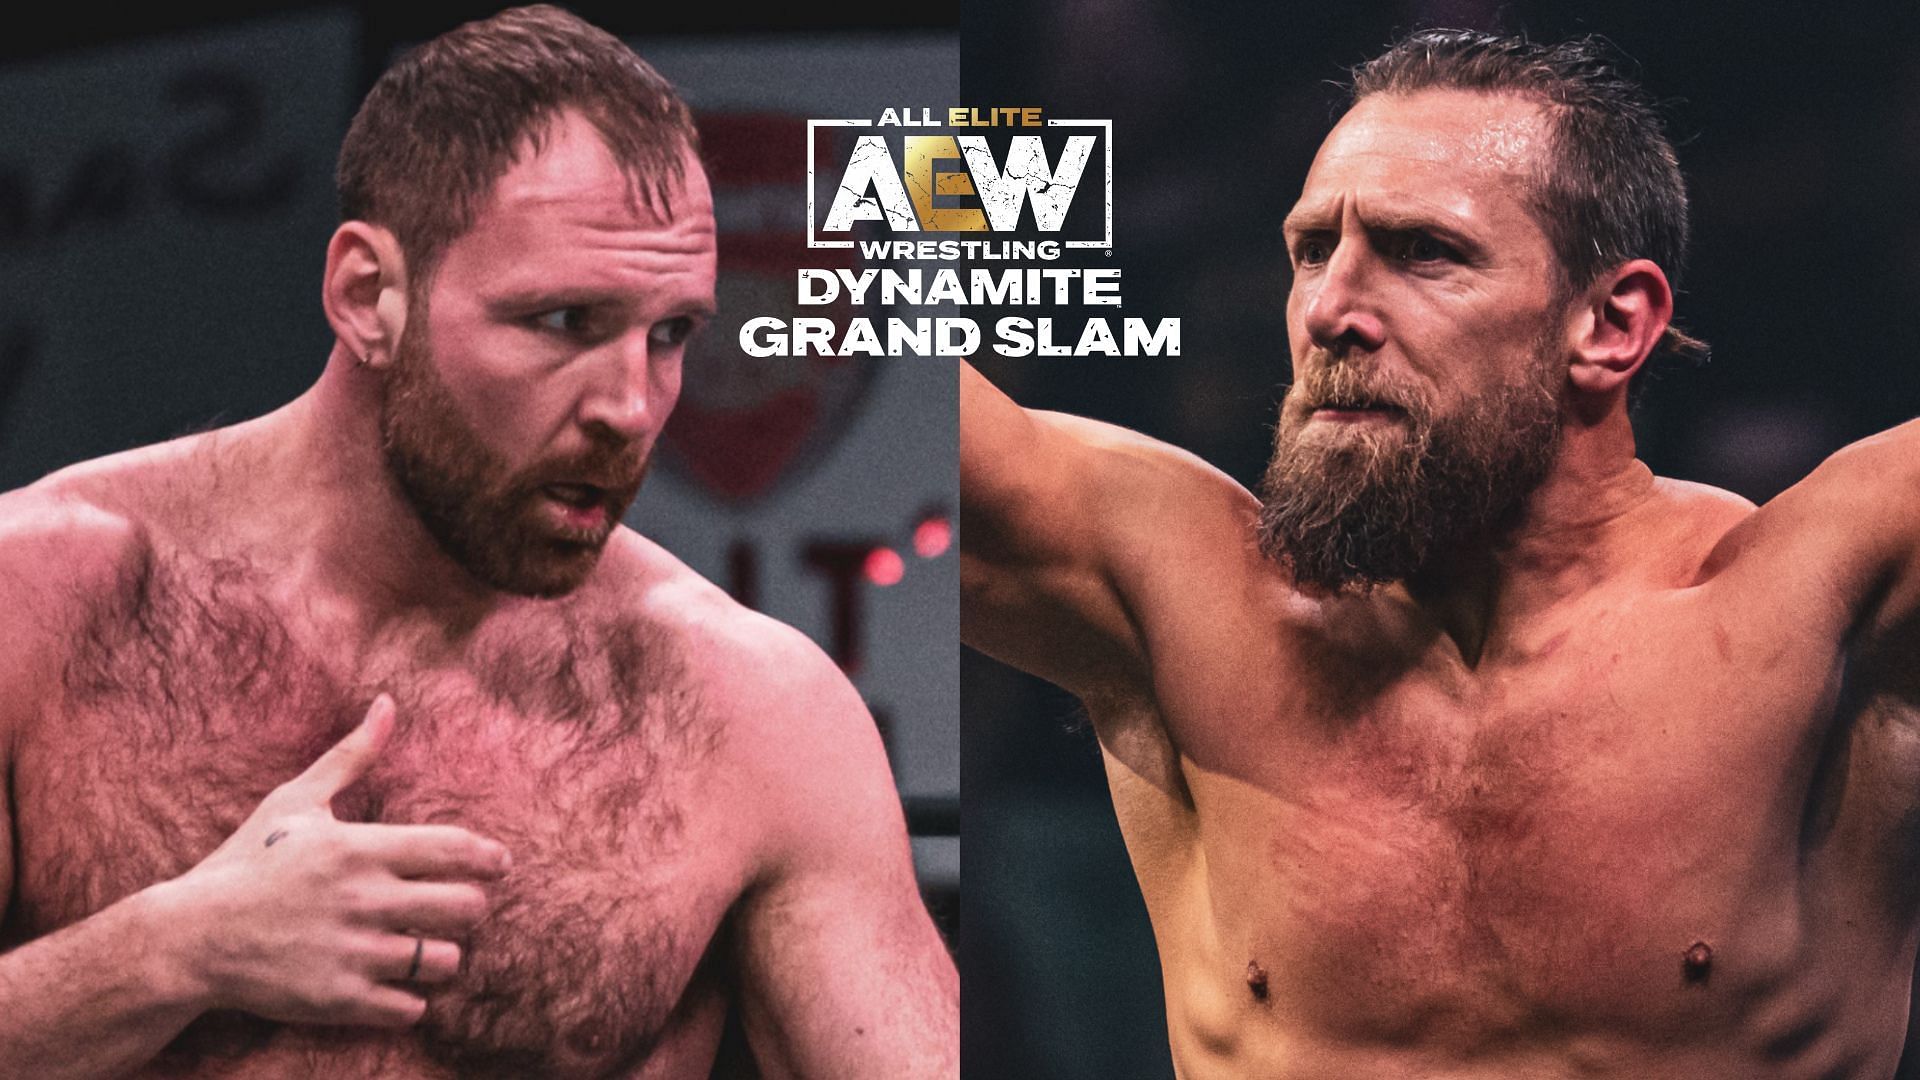 Jon Moxley and Bryan Danielson at AEW events in 2022 (credits: Jay Lee Photography)